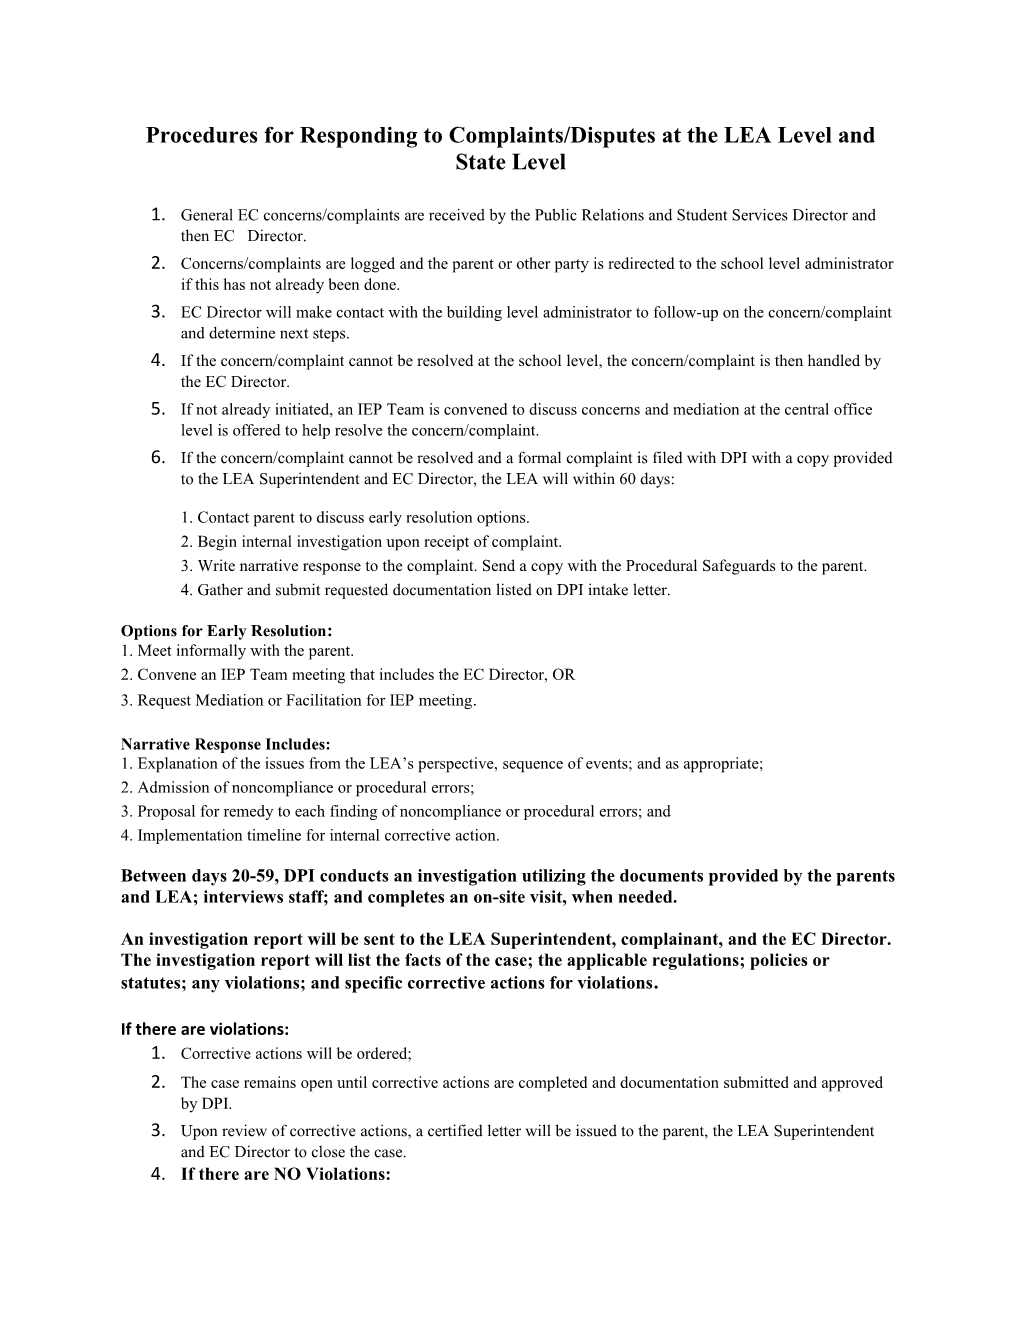 Procedures for Responding to Complaints/Disputes at the LEA Level and State Level